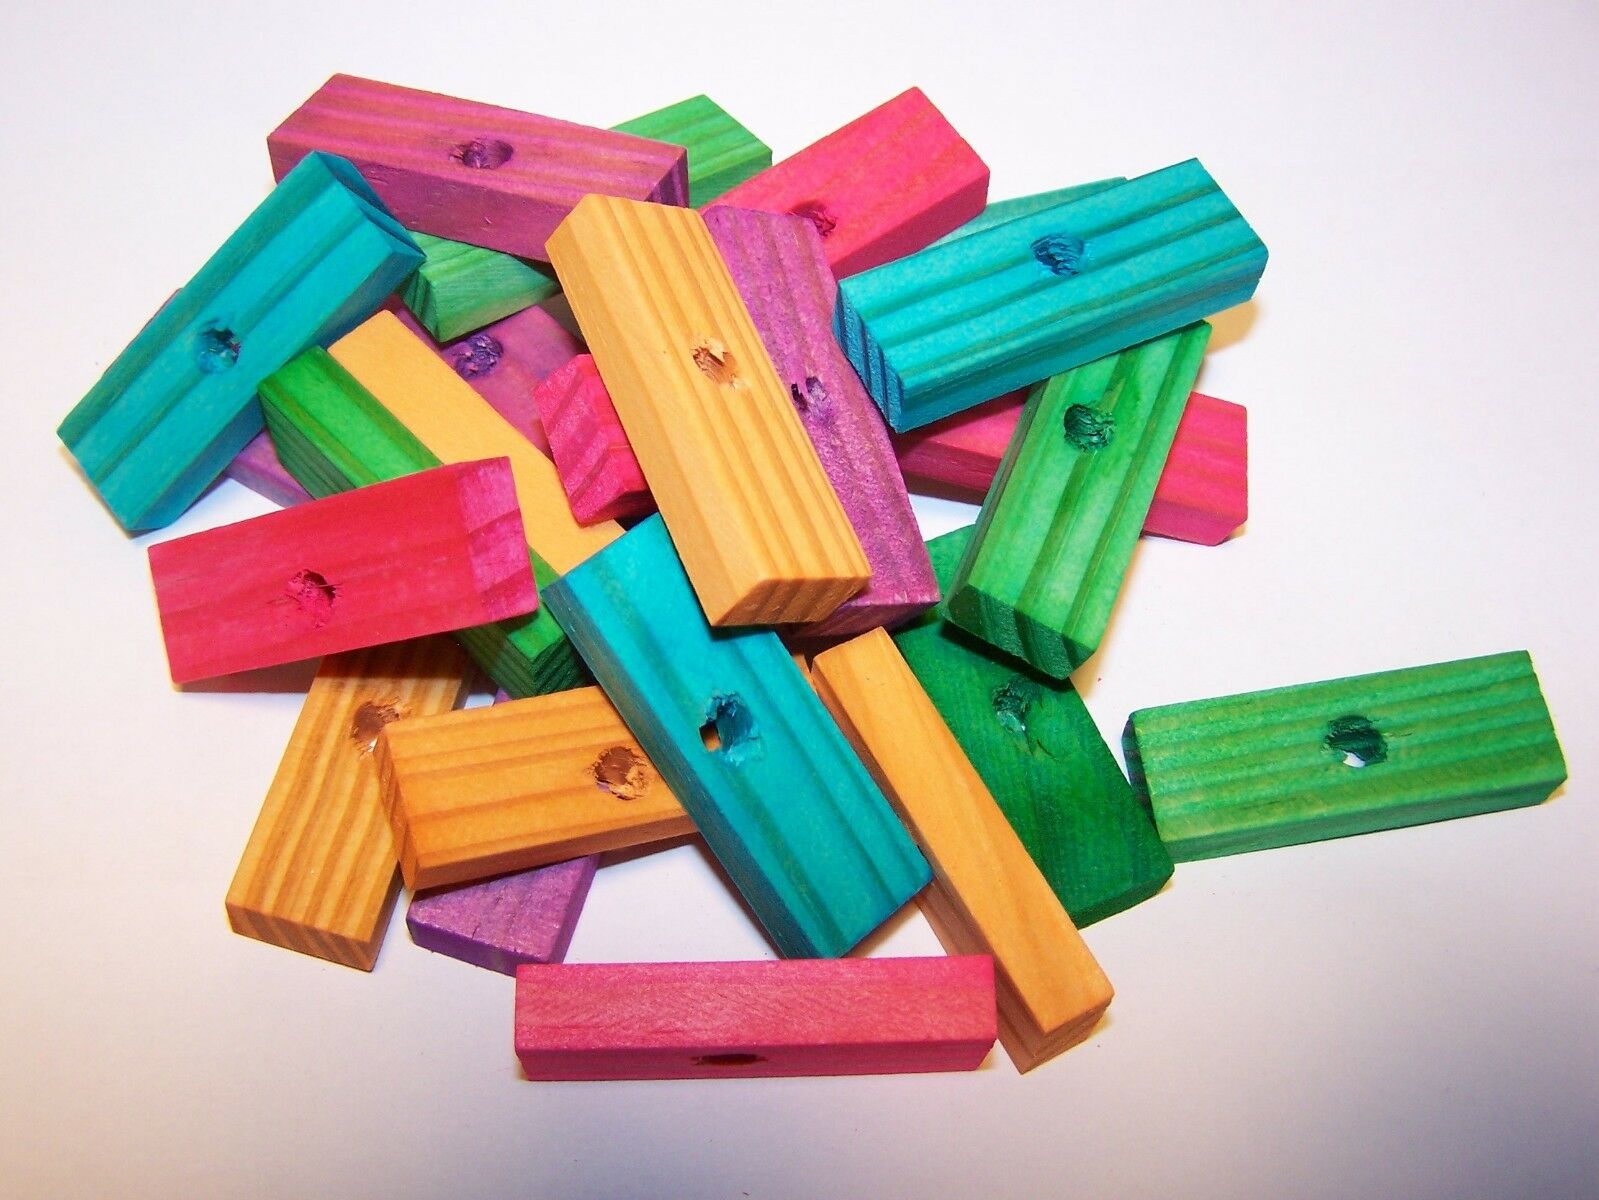 25 Wood Blocks  2" X 1/2" X 1/4" Colored Wooden Parrot Bird Toy Parts 1/4" Hole